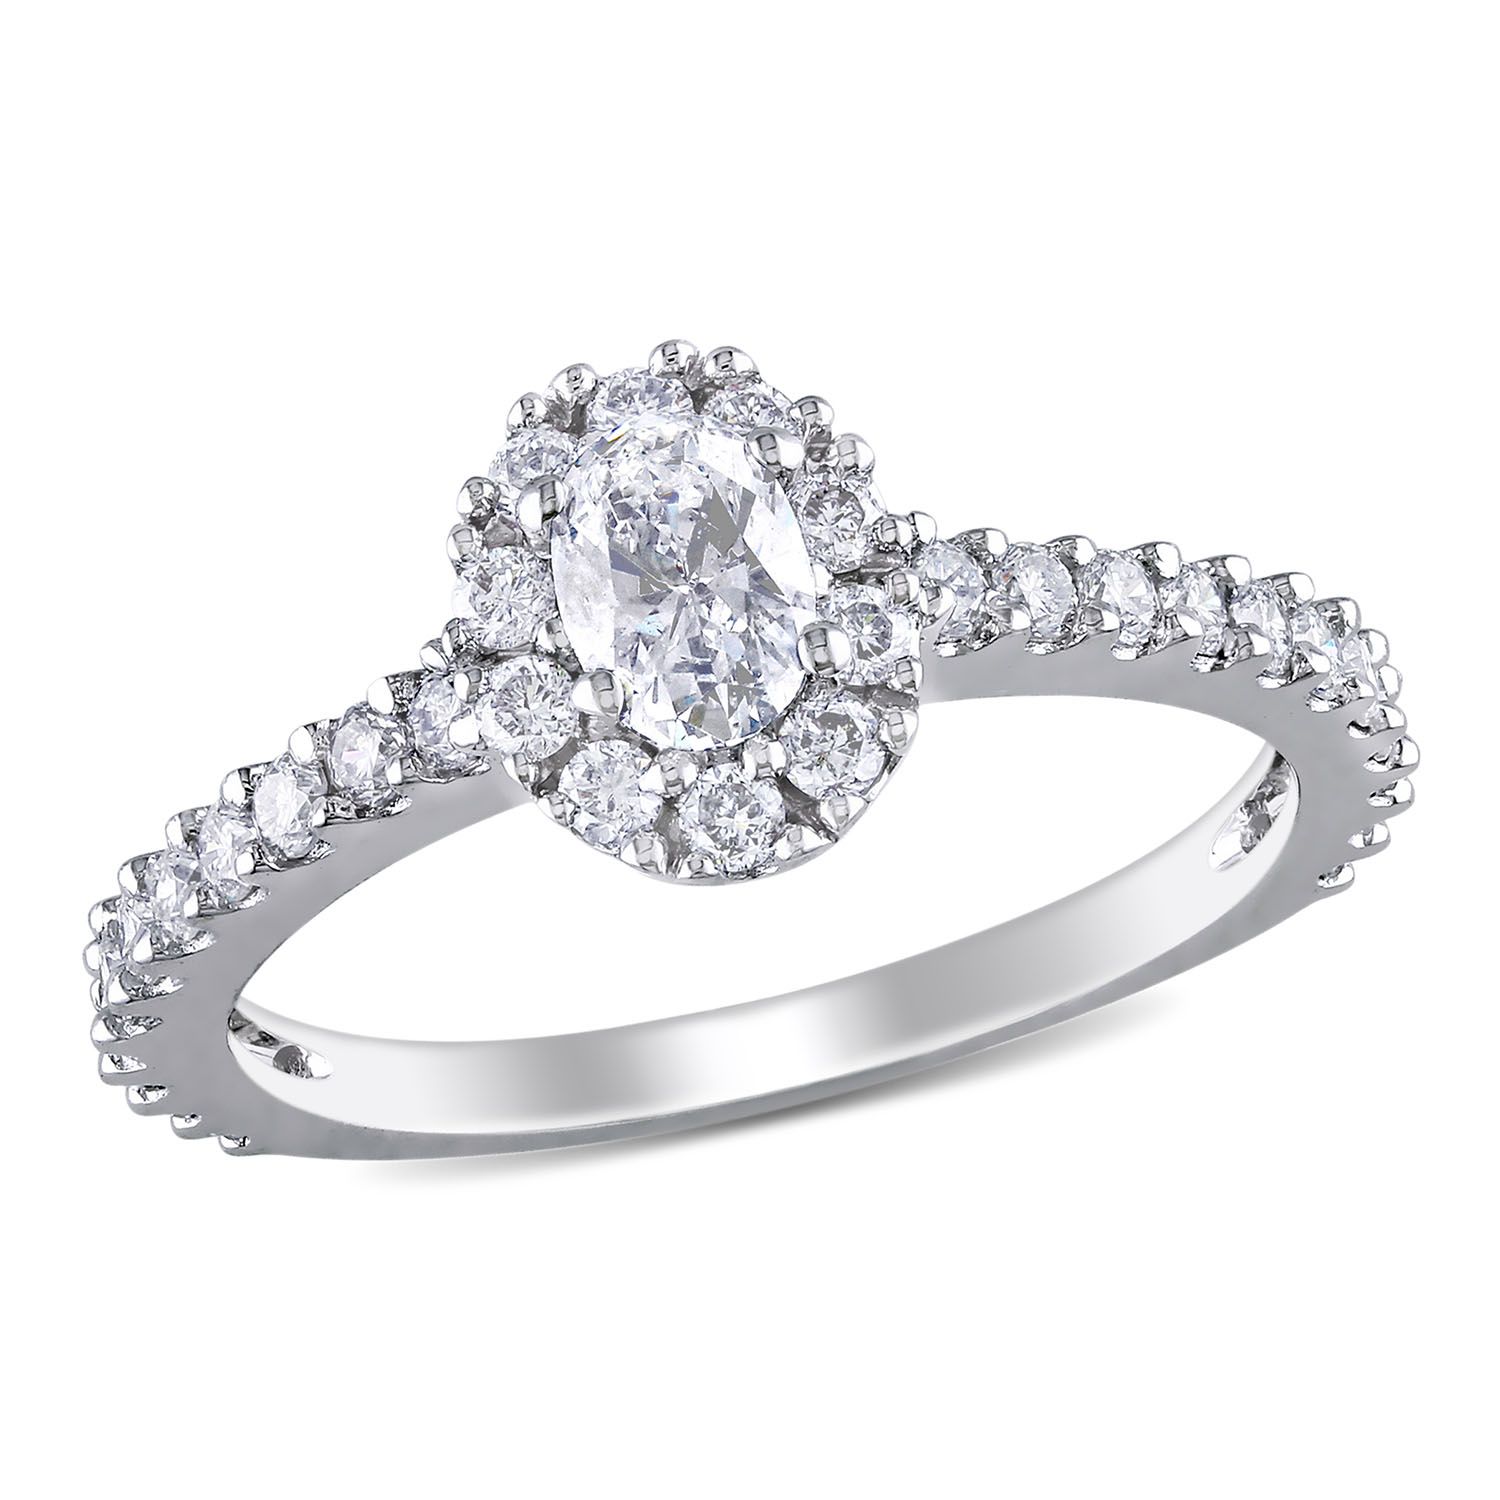 Allura 1 CT. T.W. Oval Halo Diamond Engagement Ring in 14k White Gold